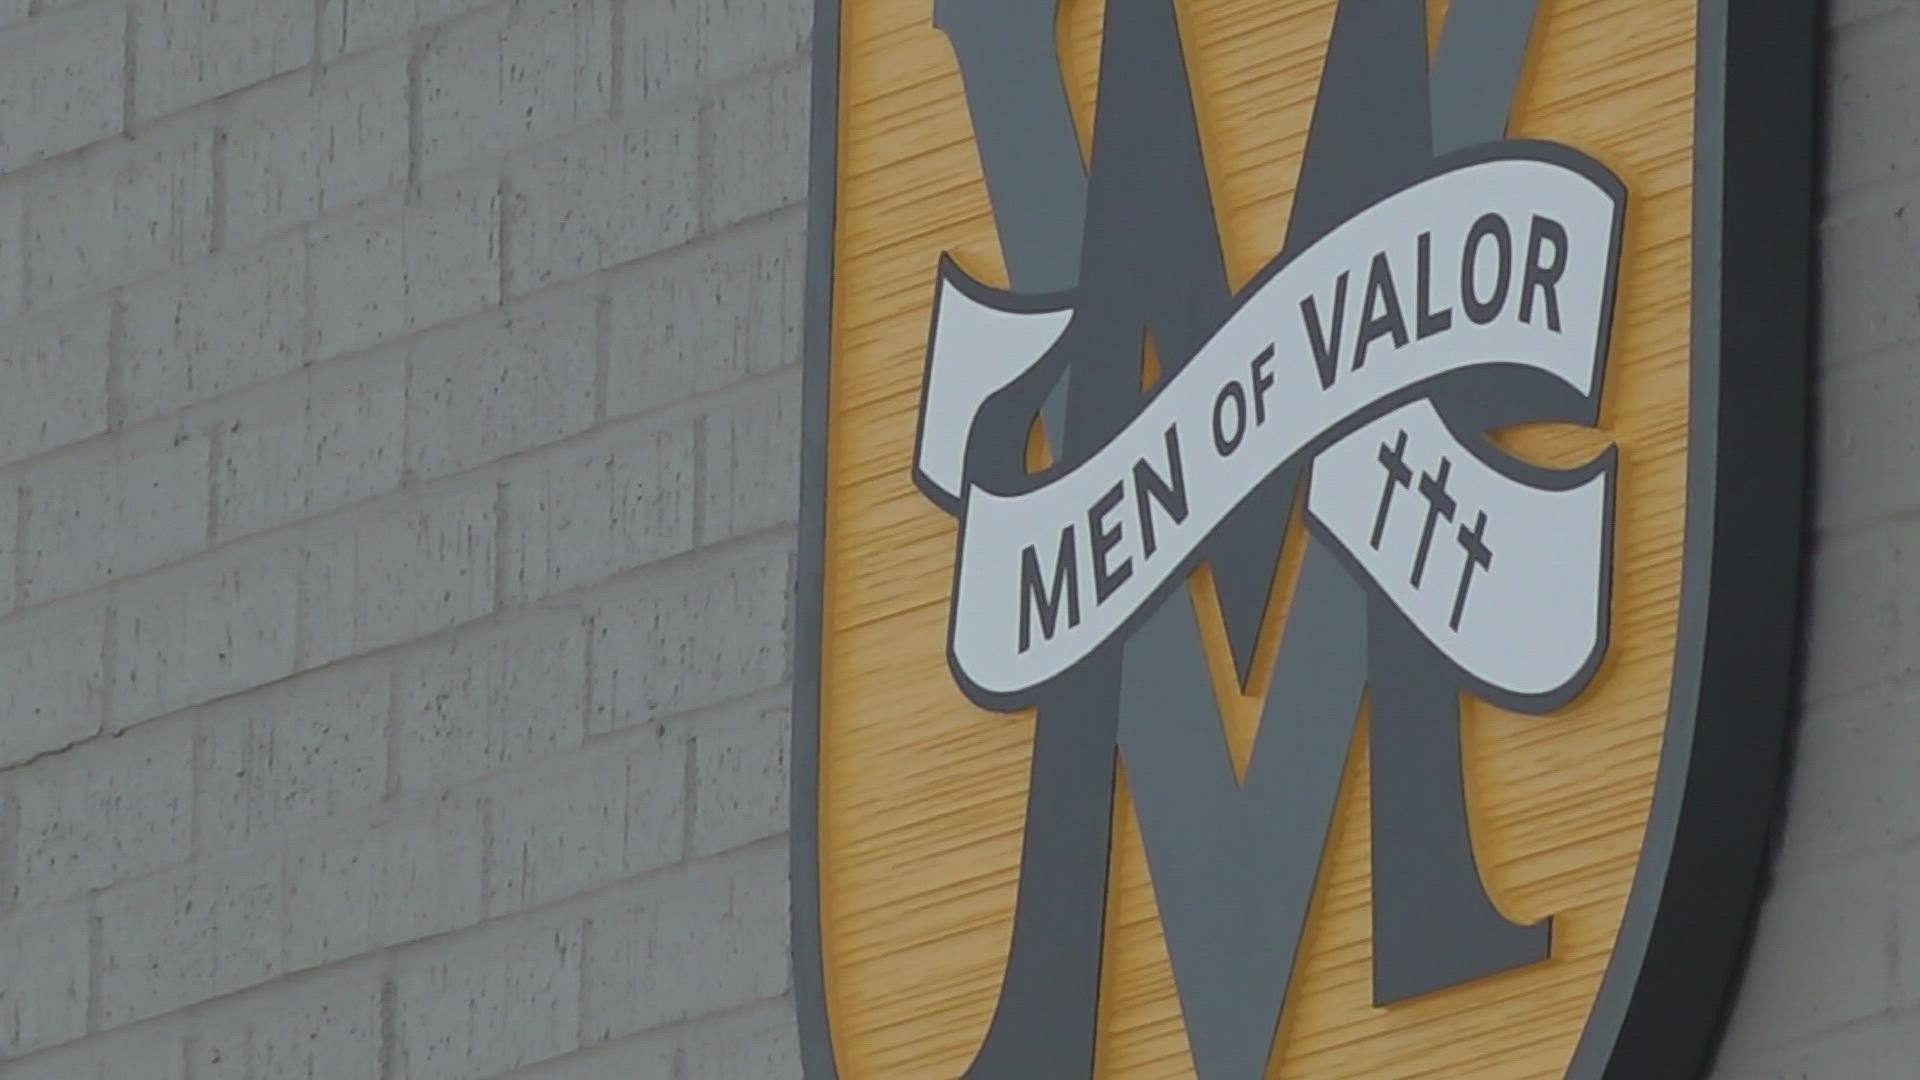 The program is called Men of Valor and their program will provide housing, counseling, work placement and chances for former inmates to successfully reenter society.